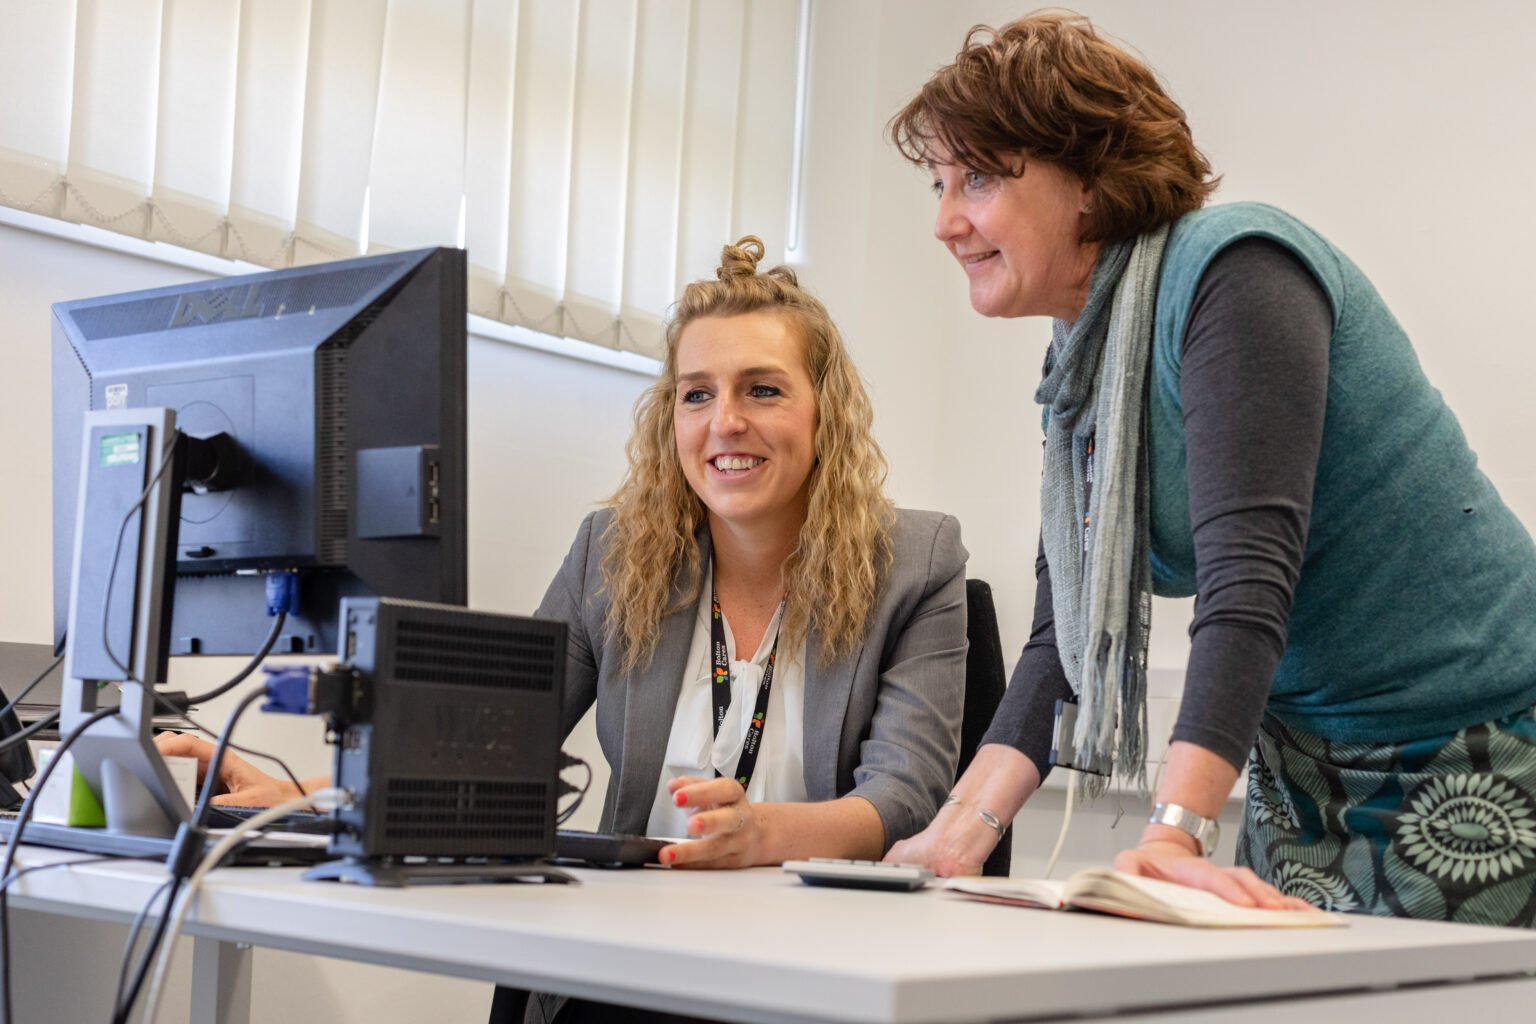 two women looking at a computer monitor, smiling as they work